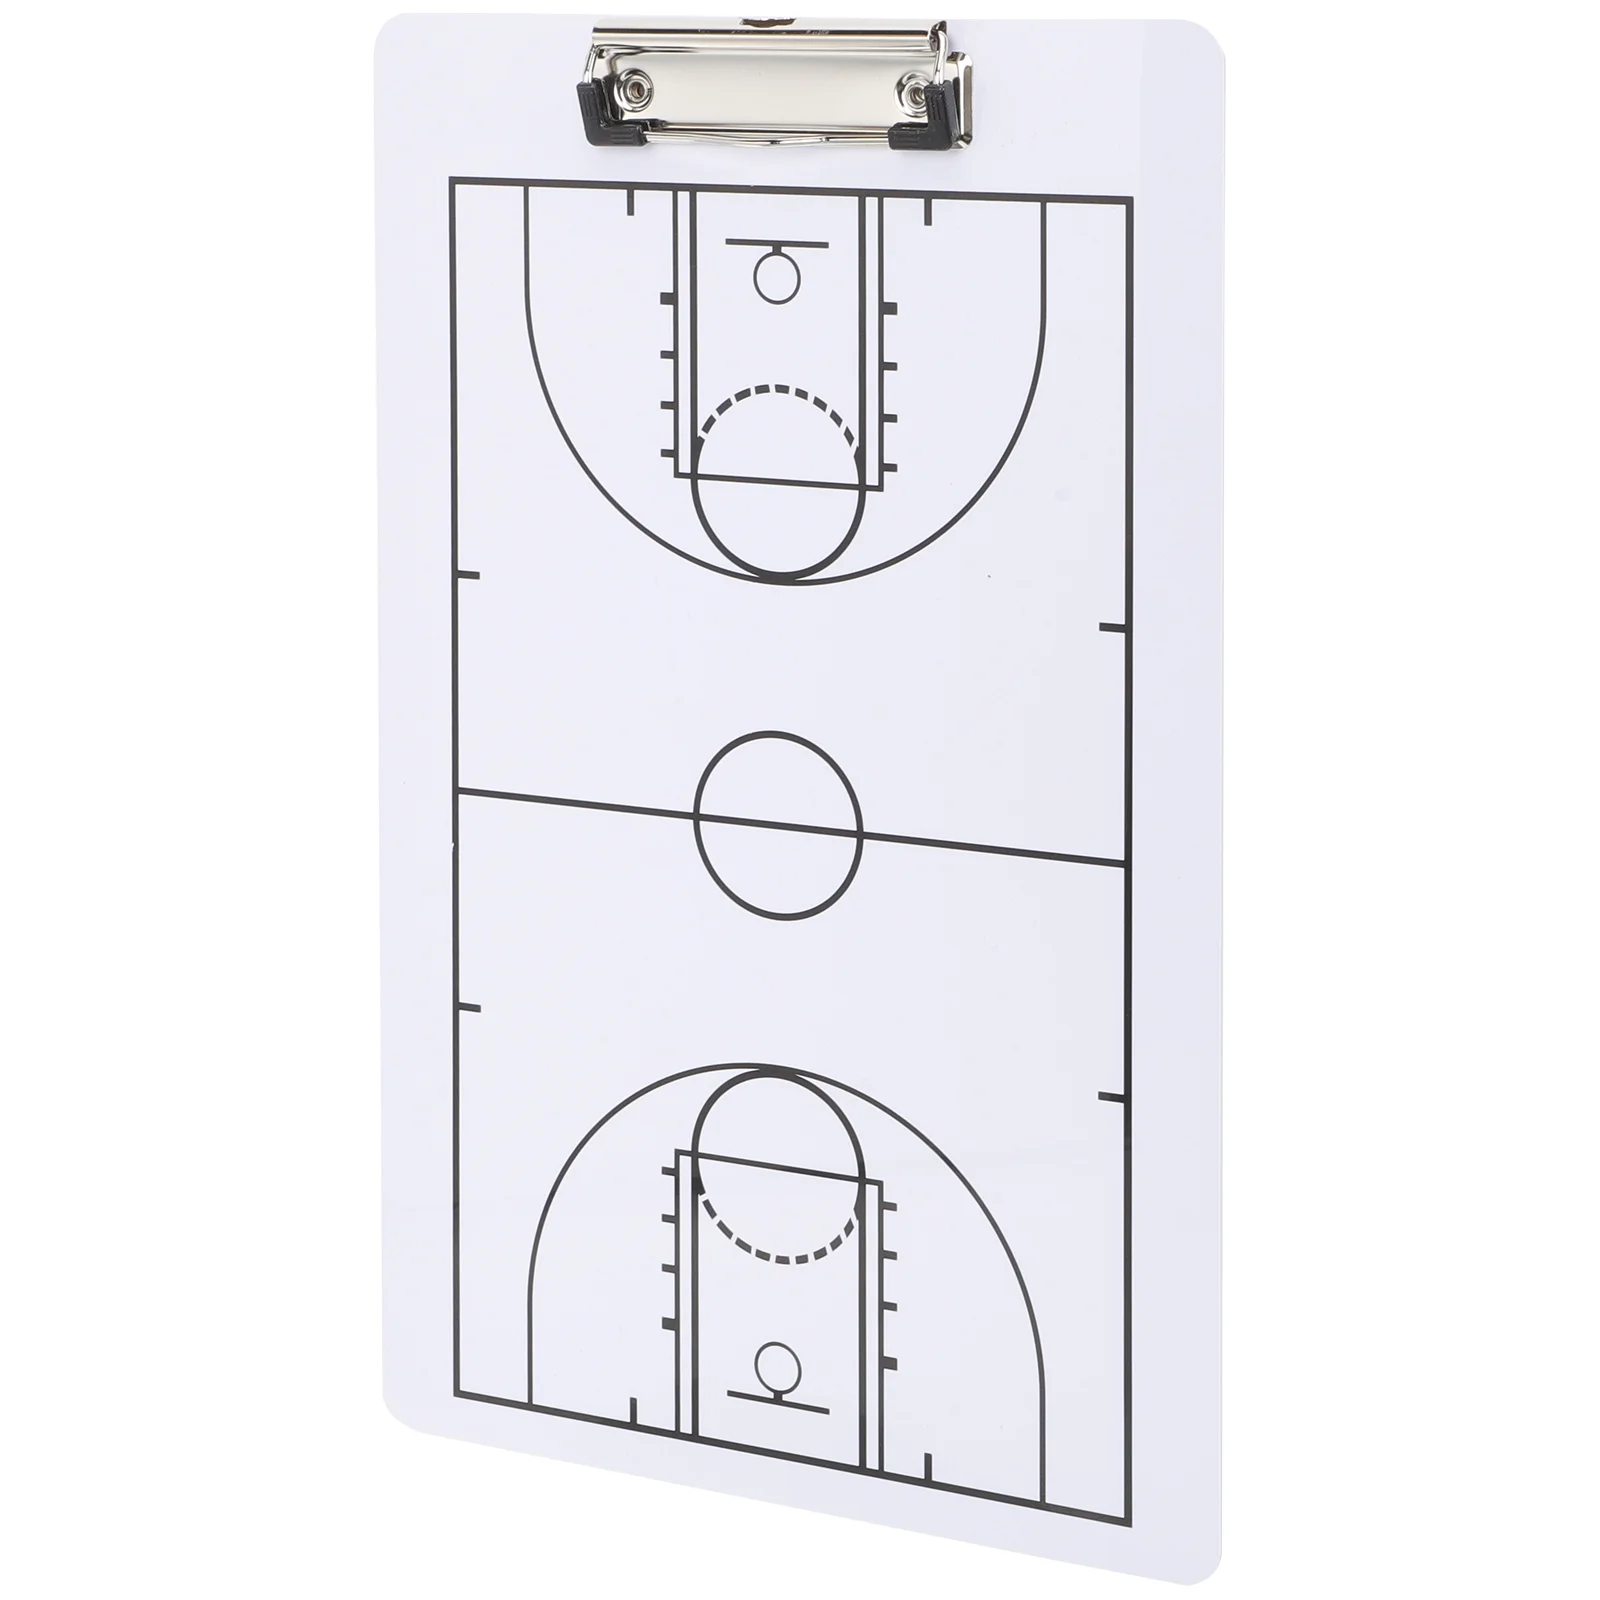 

Basketball Board Creative Match Writing Tactics Soccer Magnetic Coaching Competition for Sports Reusable Pvc Training